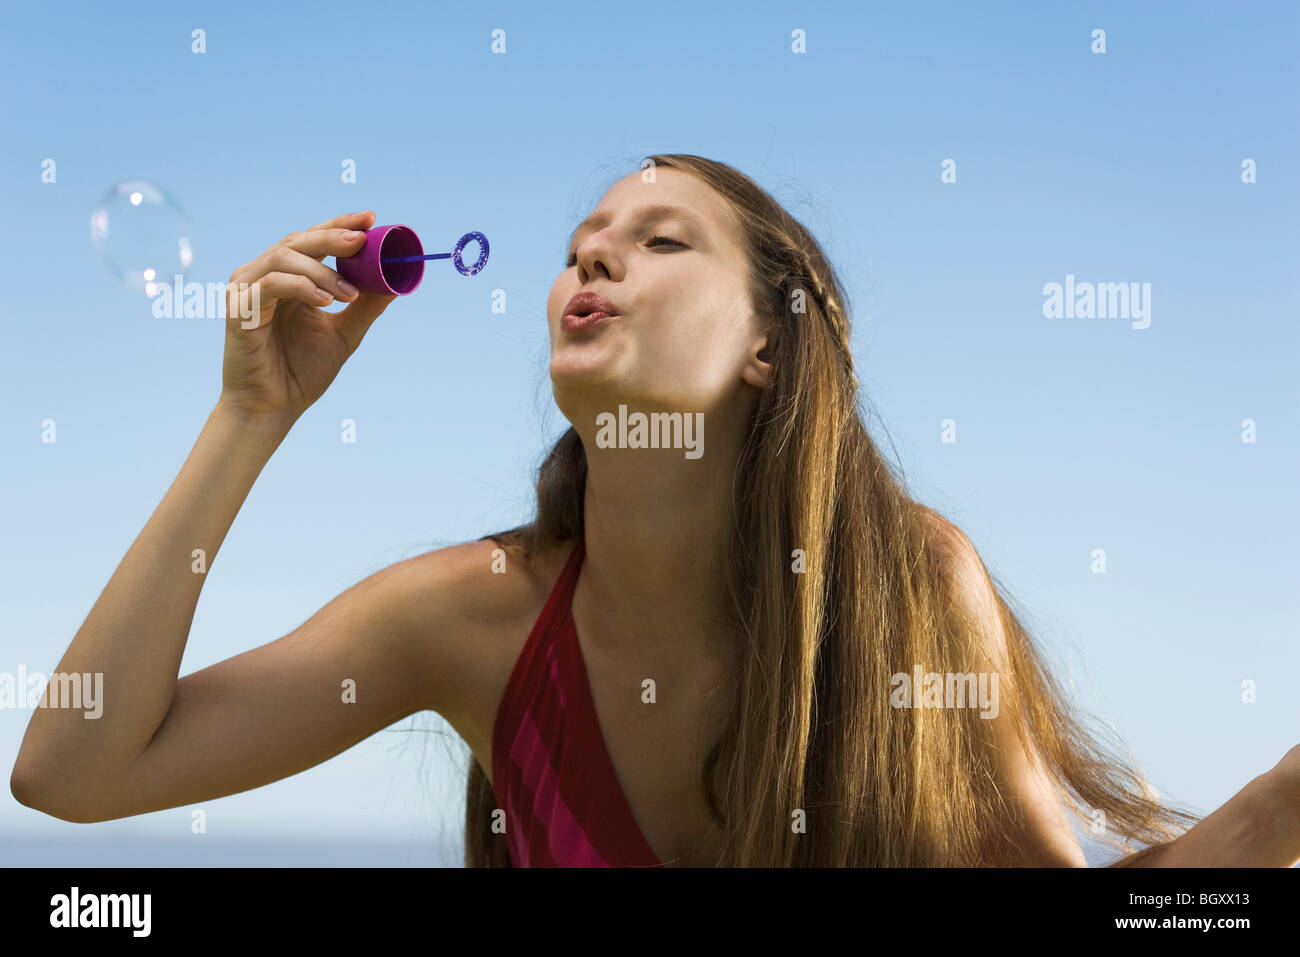 Young woman with bubble wand blowing bubbles Stock Photo